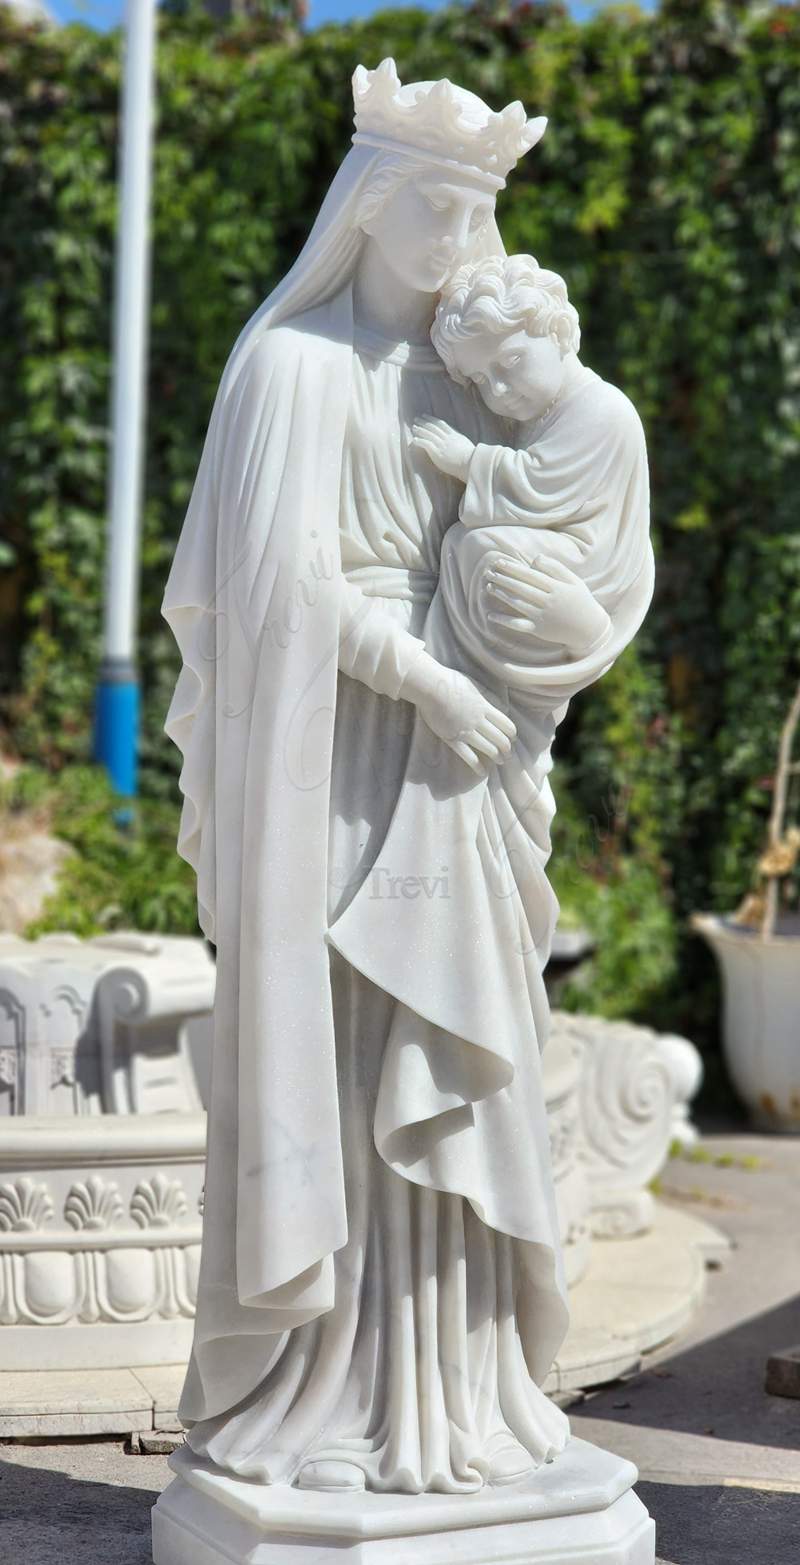 mary holding baby statue-Trevi Statue